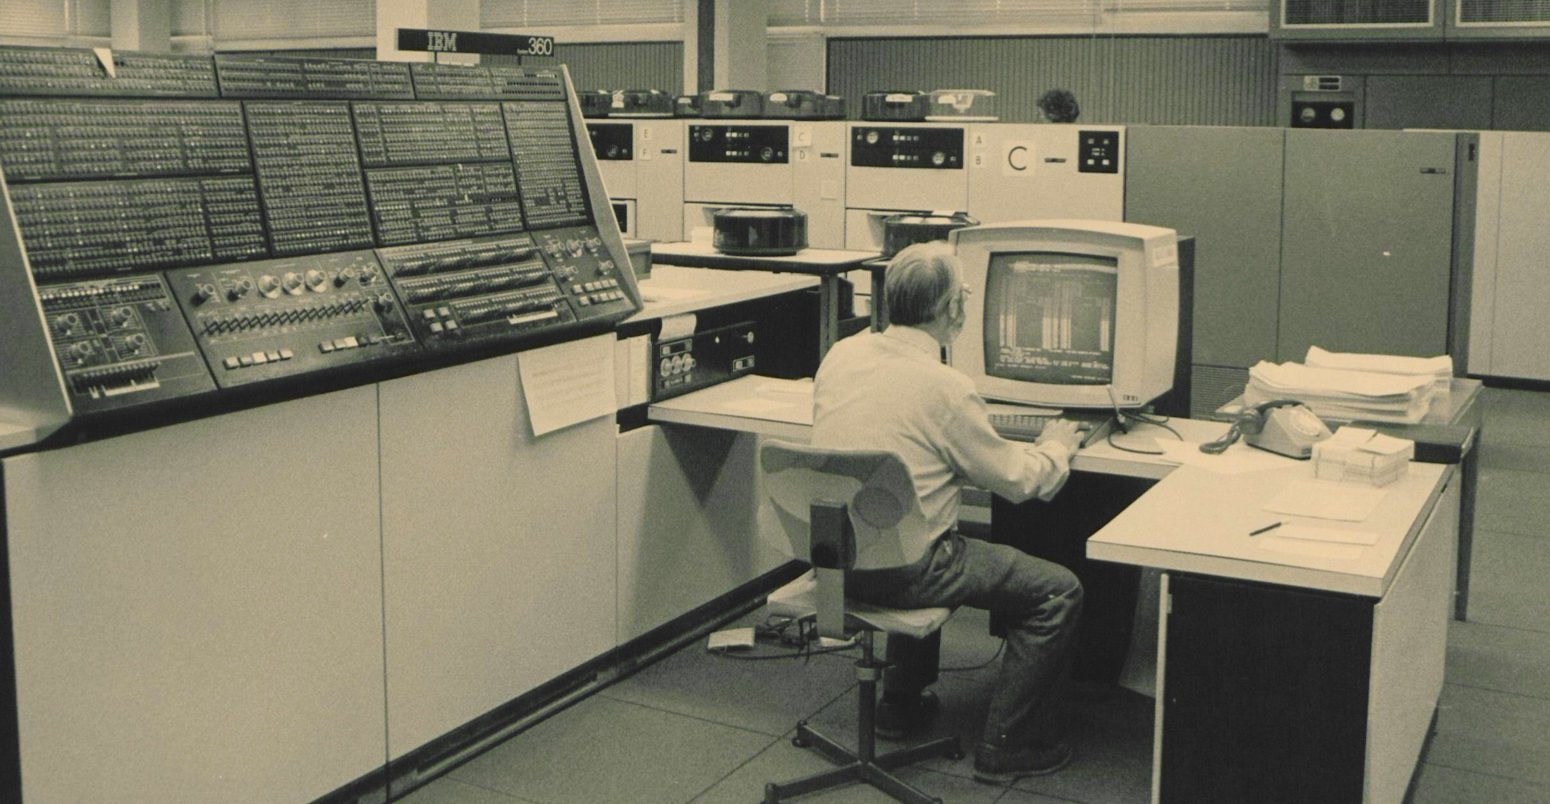 IBM 360/195 Console 1971-1982 at the Met Office. © Crown Copyright 1971-1982. Information provided by the National Meteorological Library and Archive – Met Office, UK.